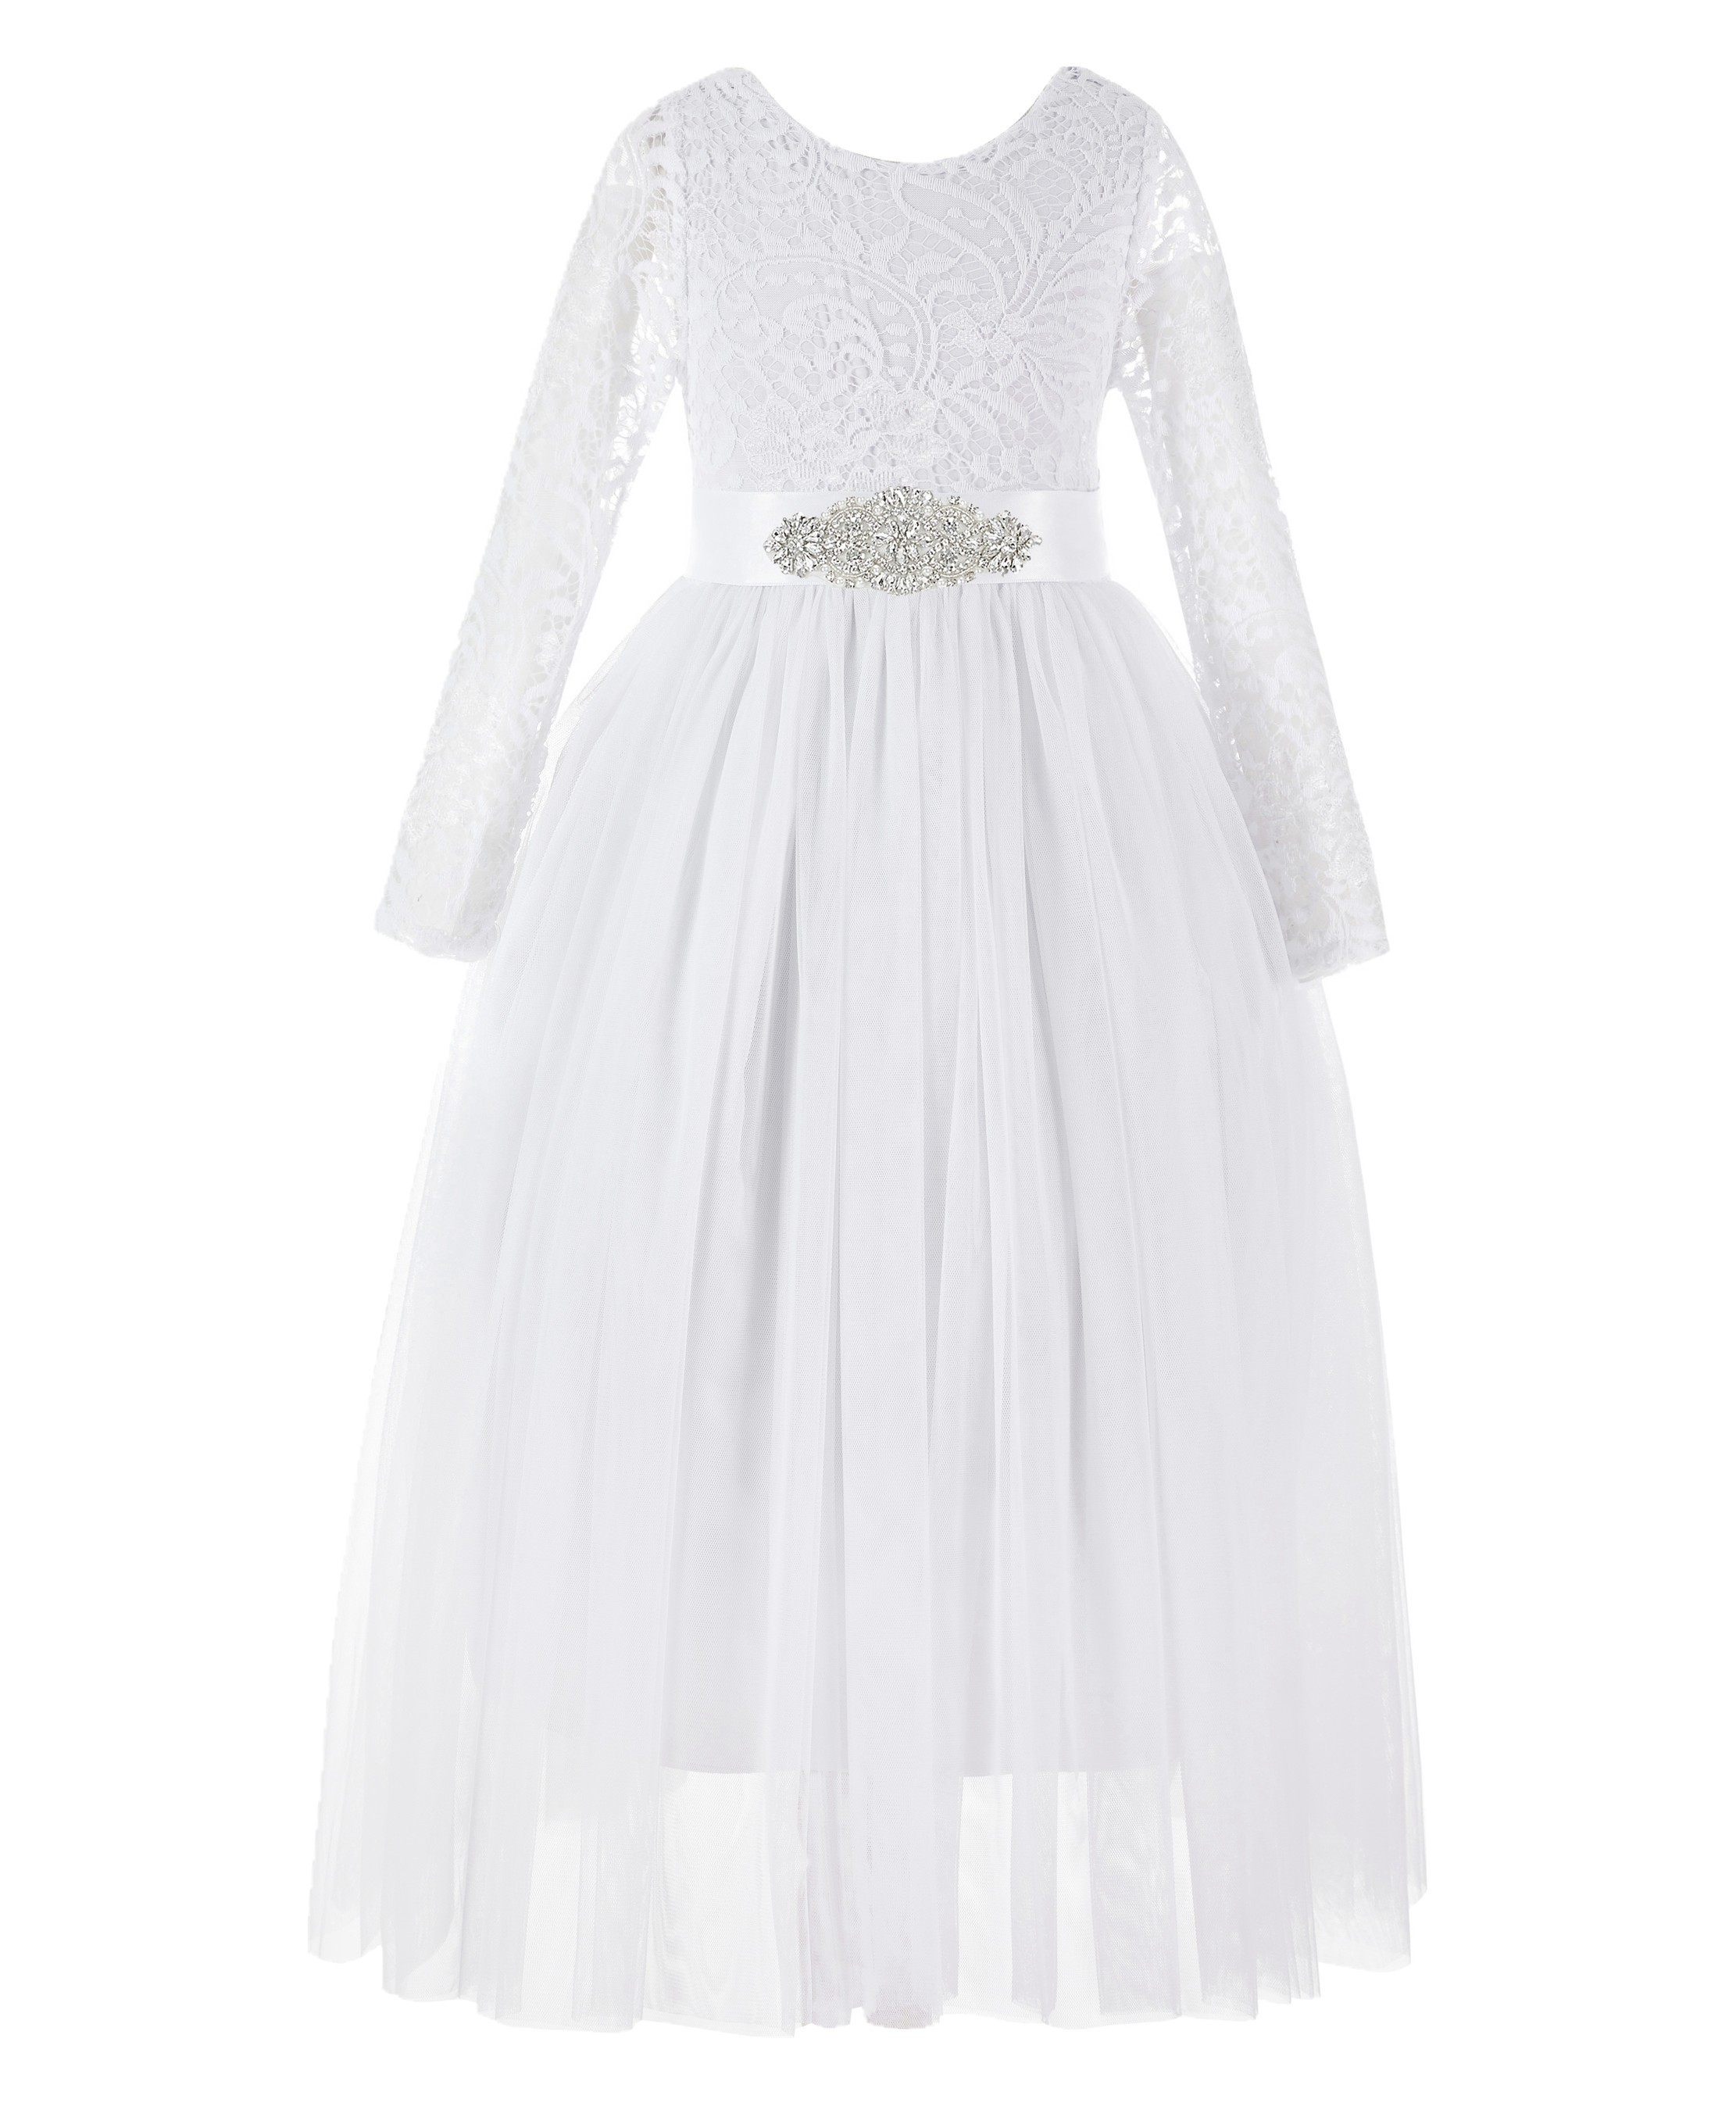 White  A-Line V-Back Lace Flower Girl Dress with Sleeves 290R